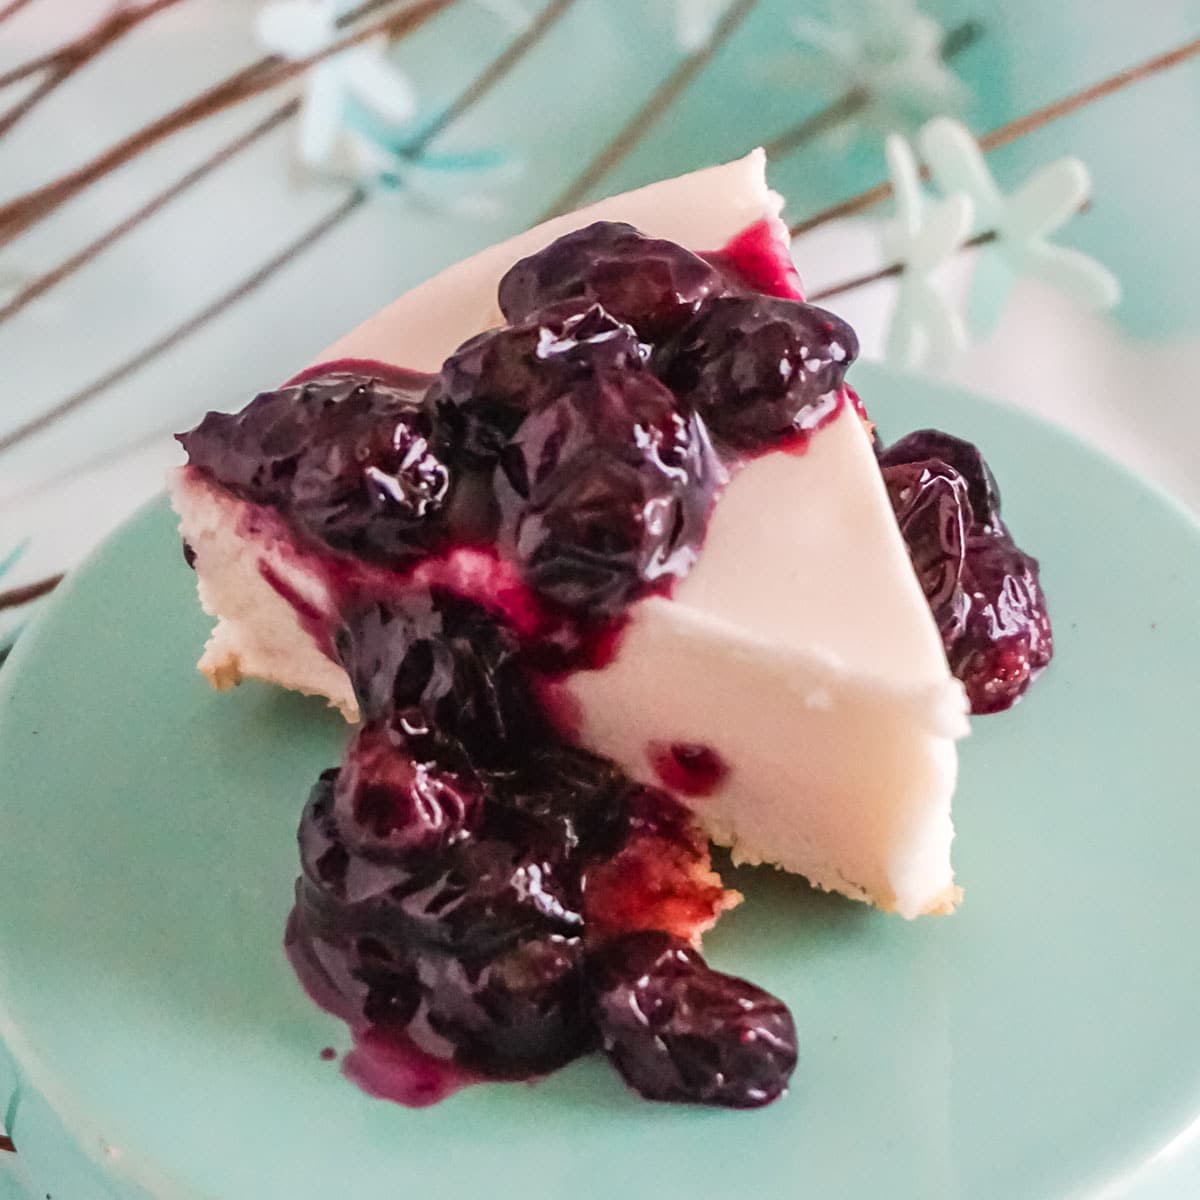 blueberry topping for cheesecake